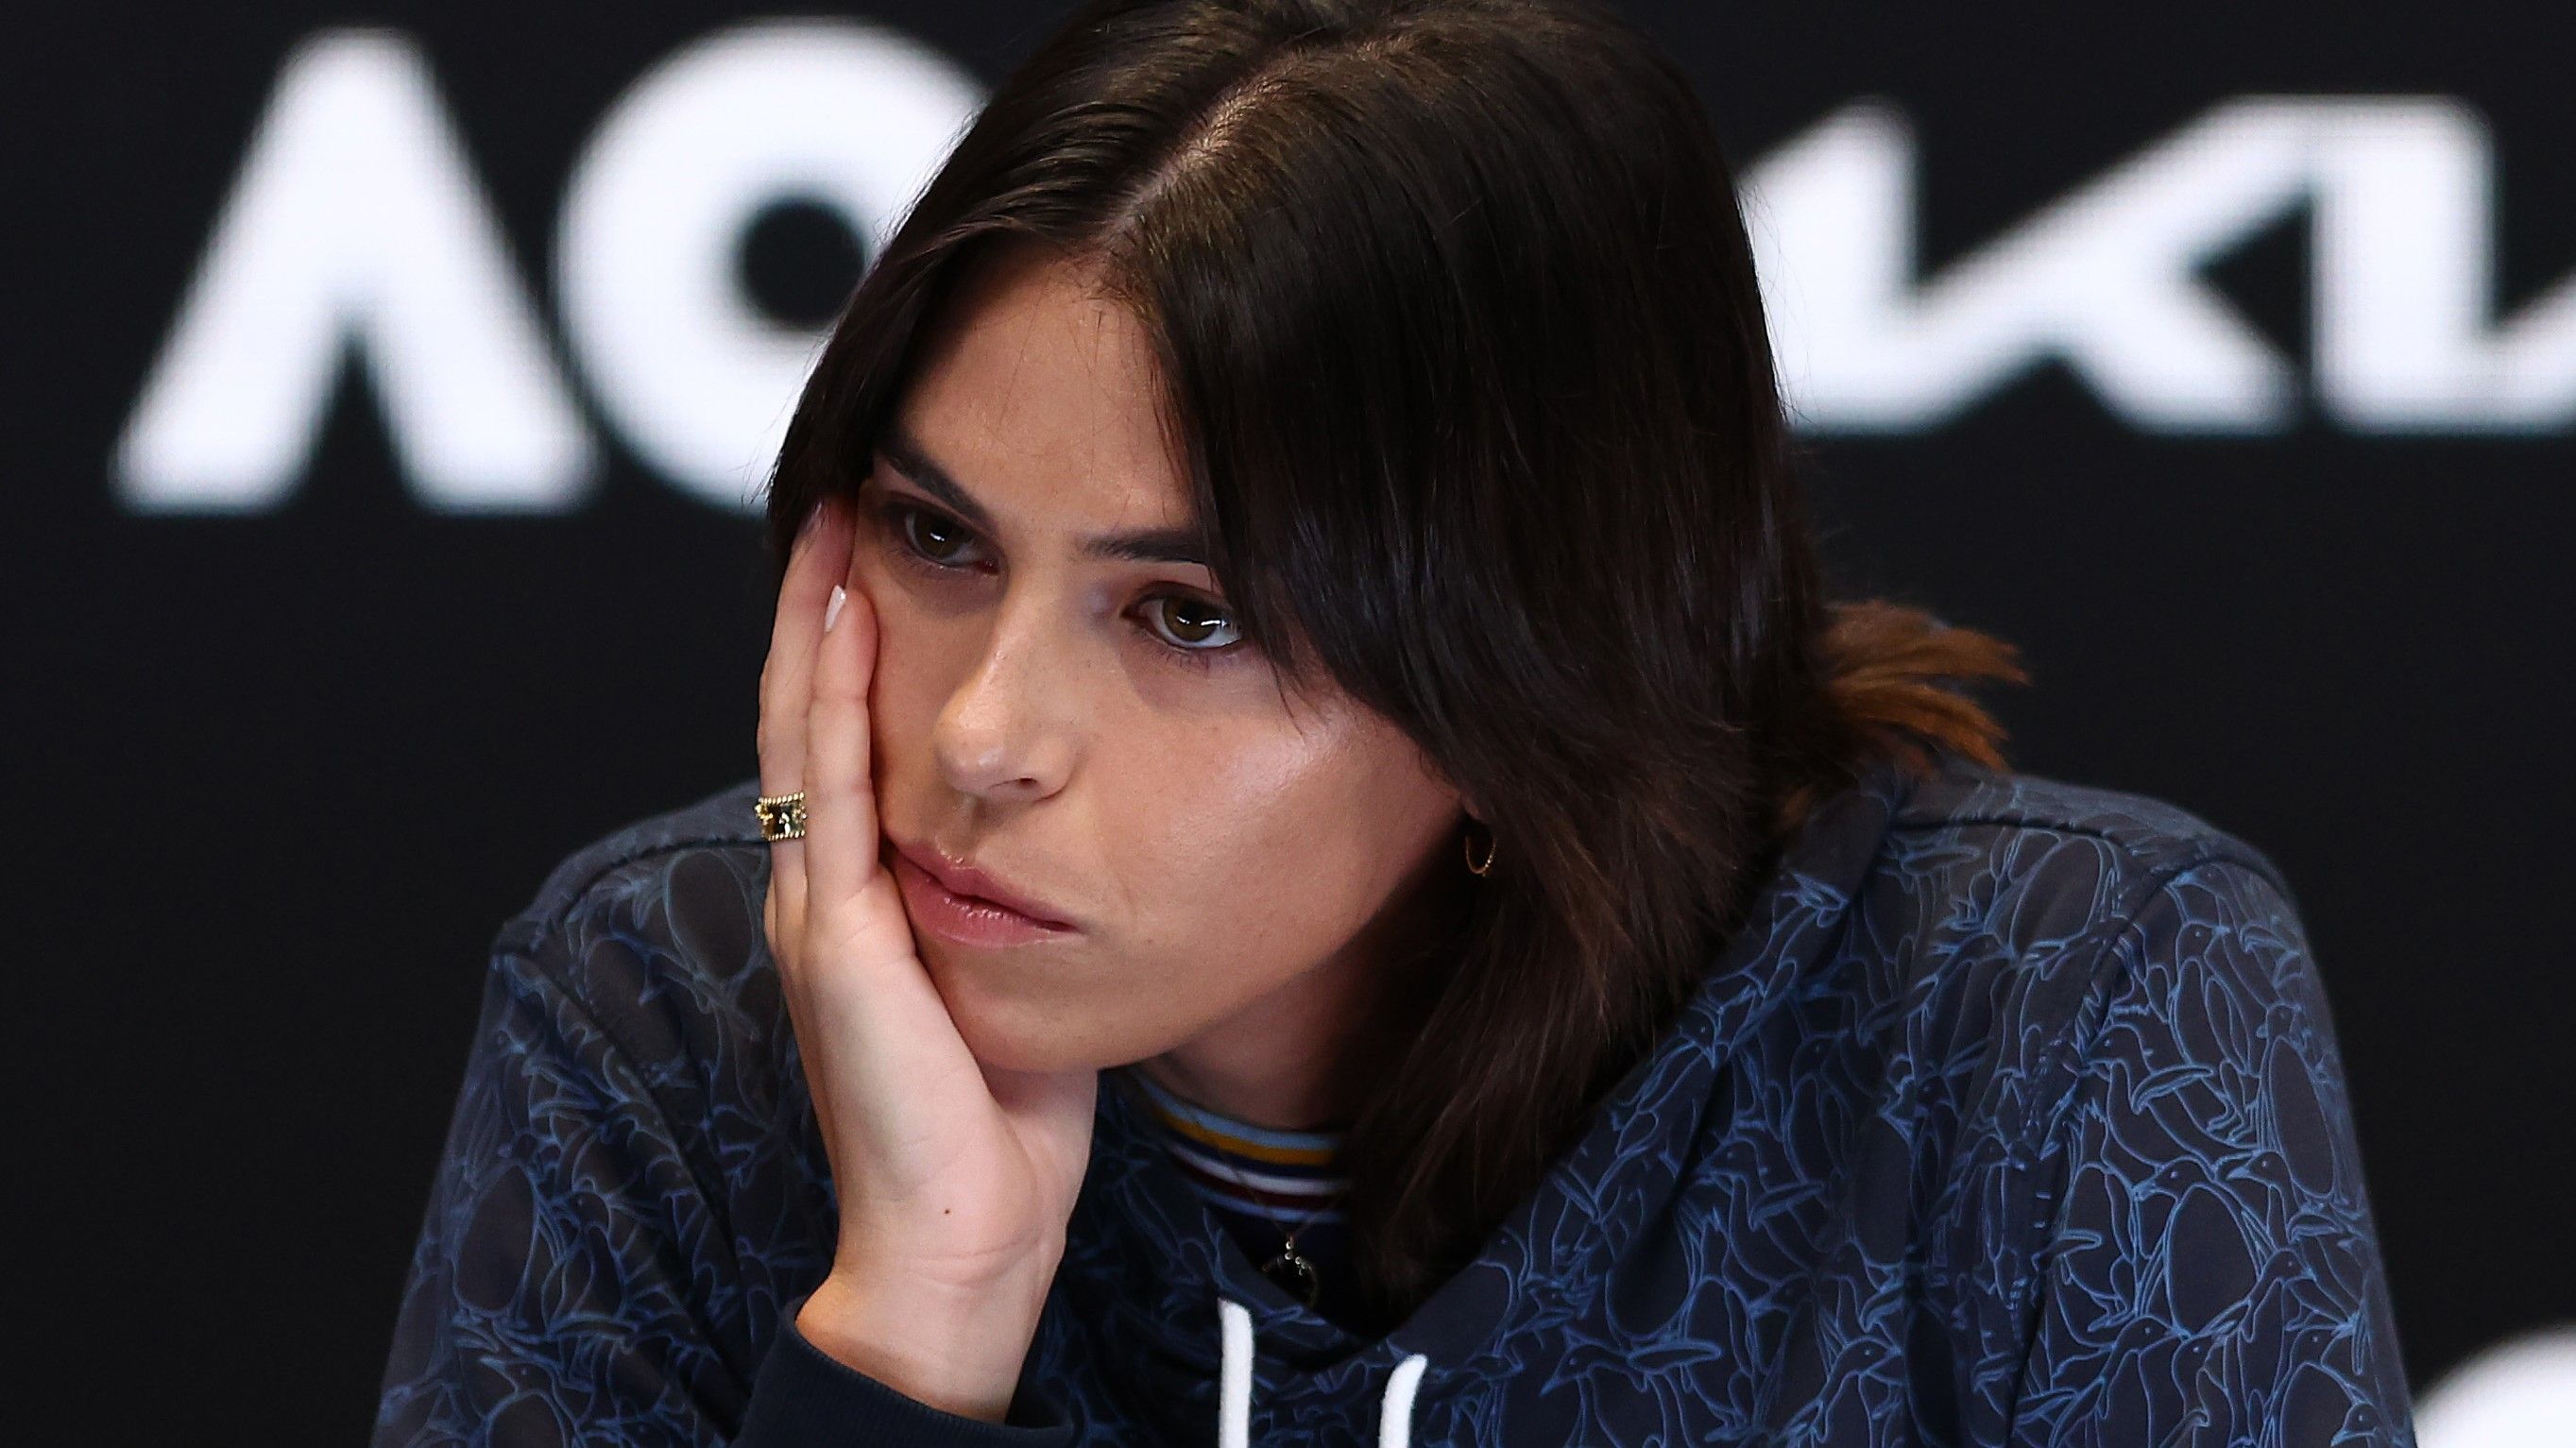 A teary Ajla Tomljanovic speaks to the media during a press conference after pulling out of the 2023 Australian Open.